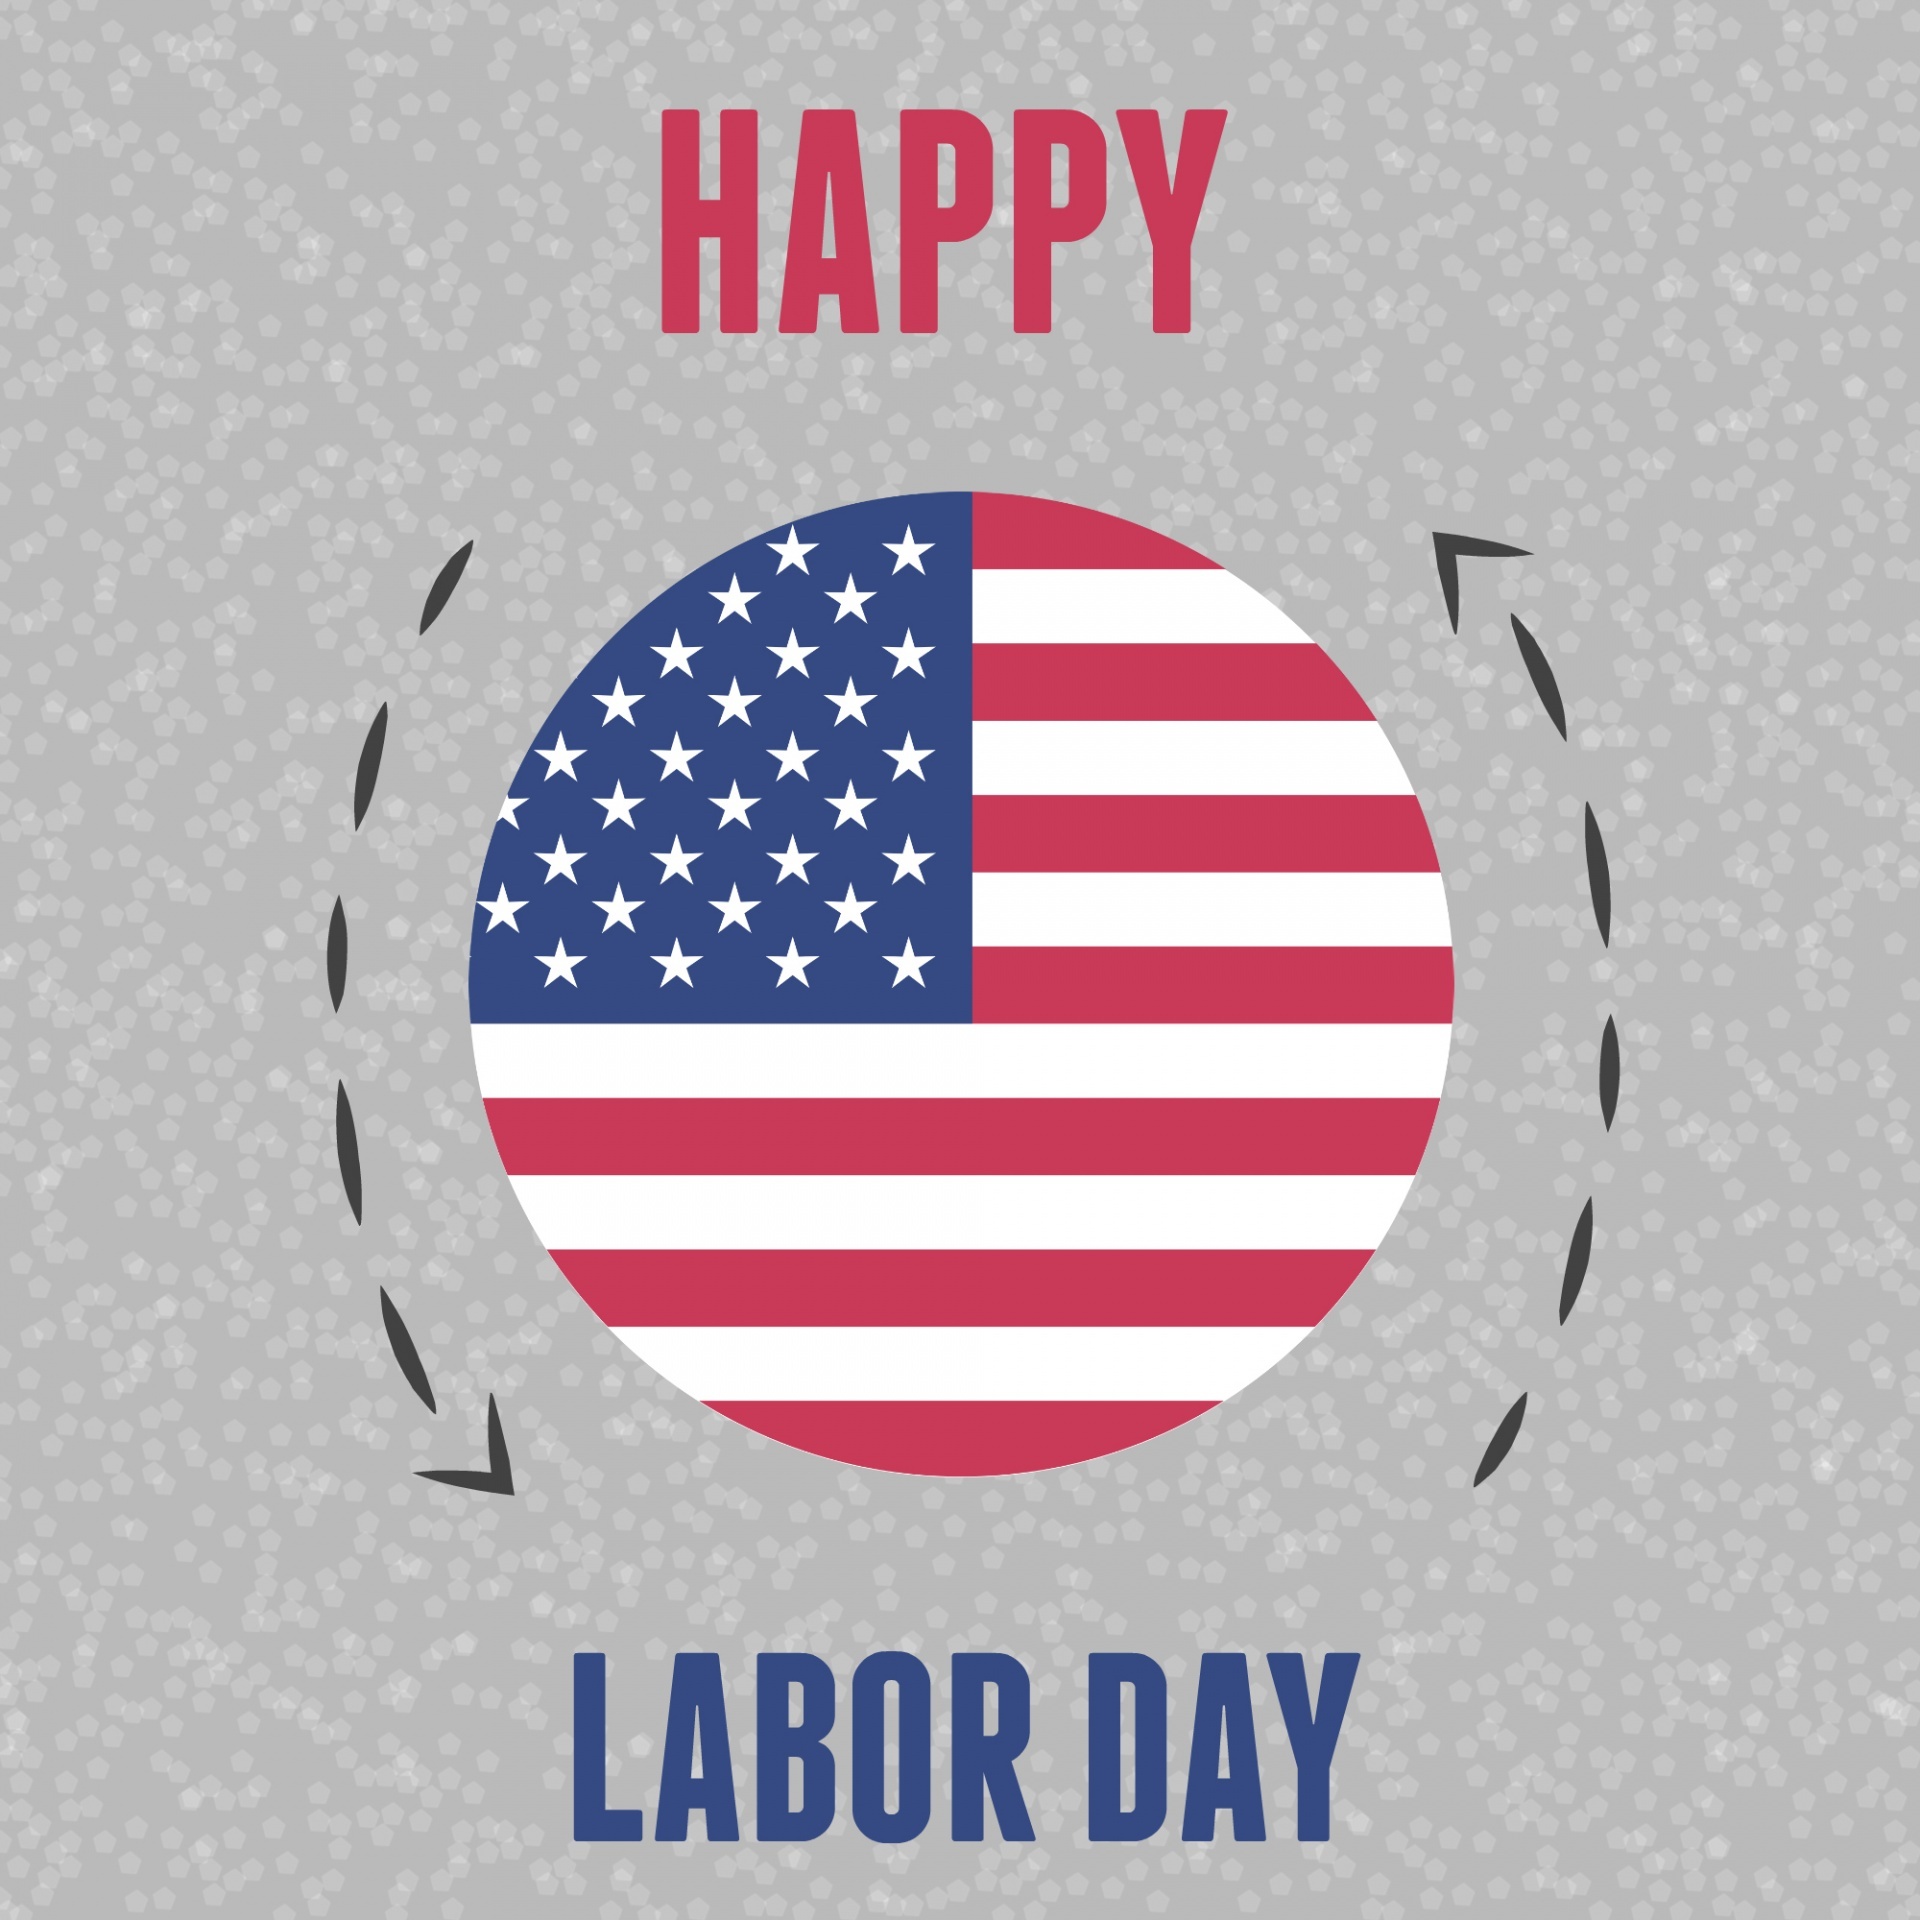 Labor Day Holiday, Labor day images, 2018 design corral, 1920x1920 HD Handy